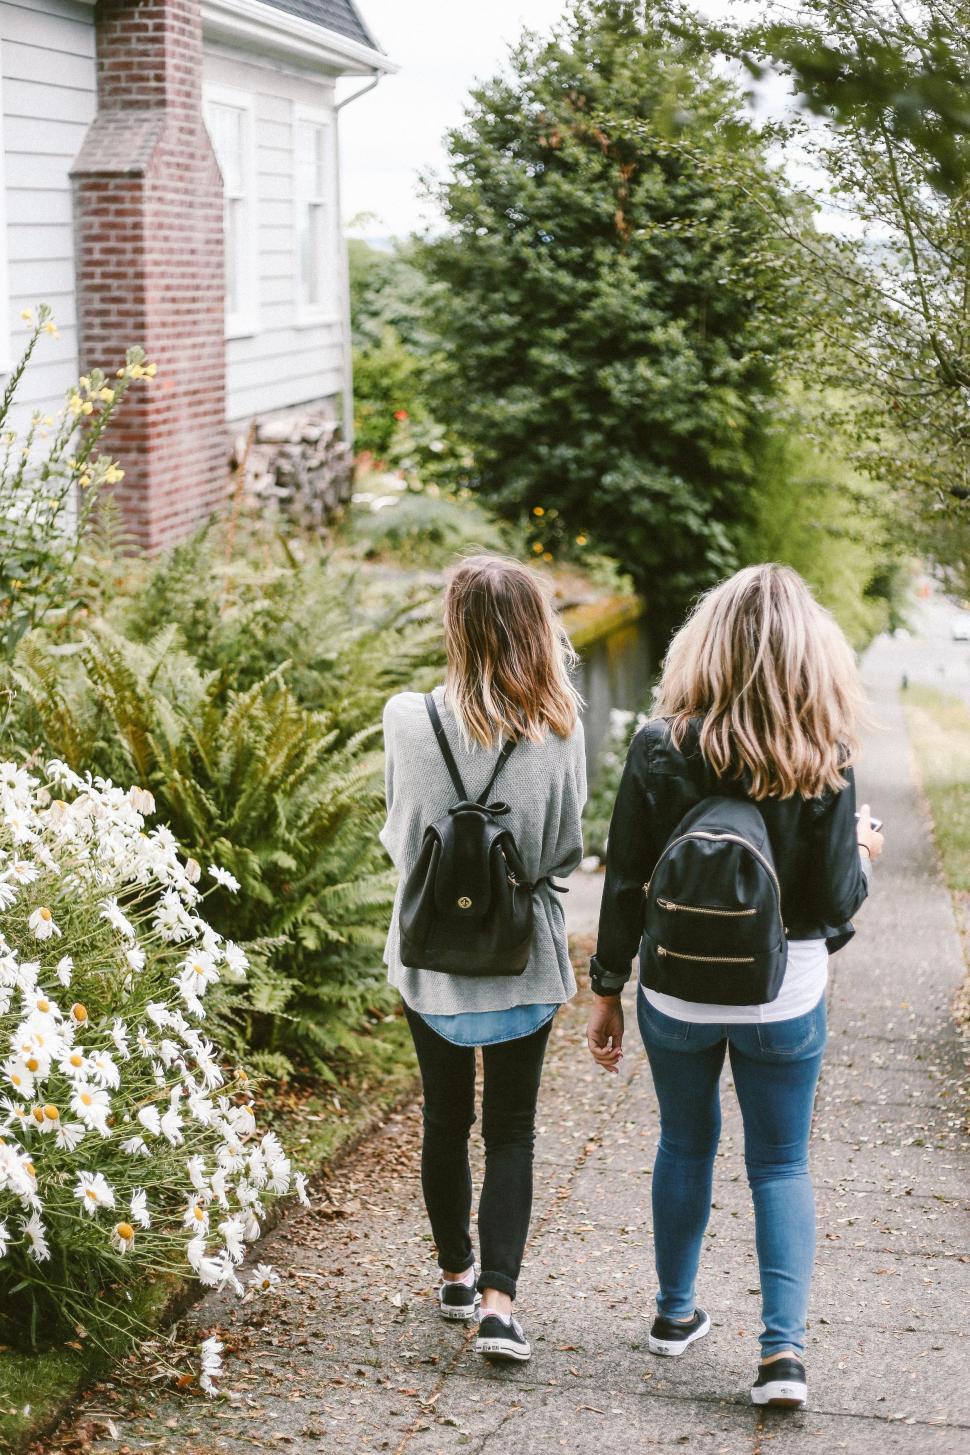 Free Image of Two Girls Walking Down a Path Holding Hands 